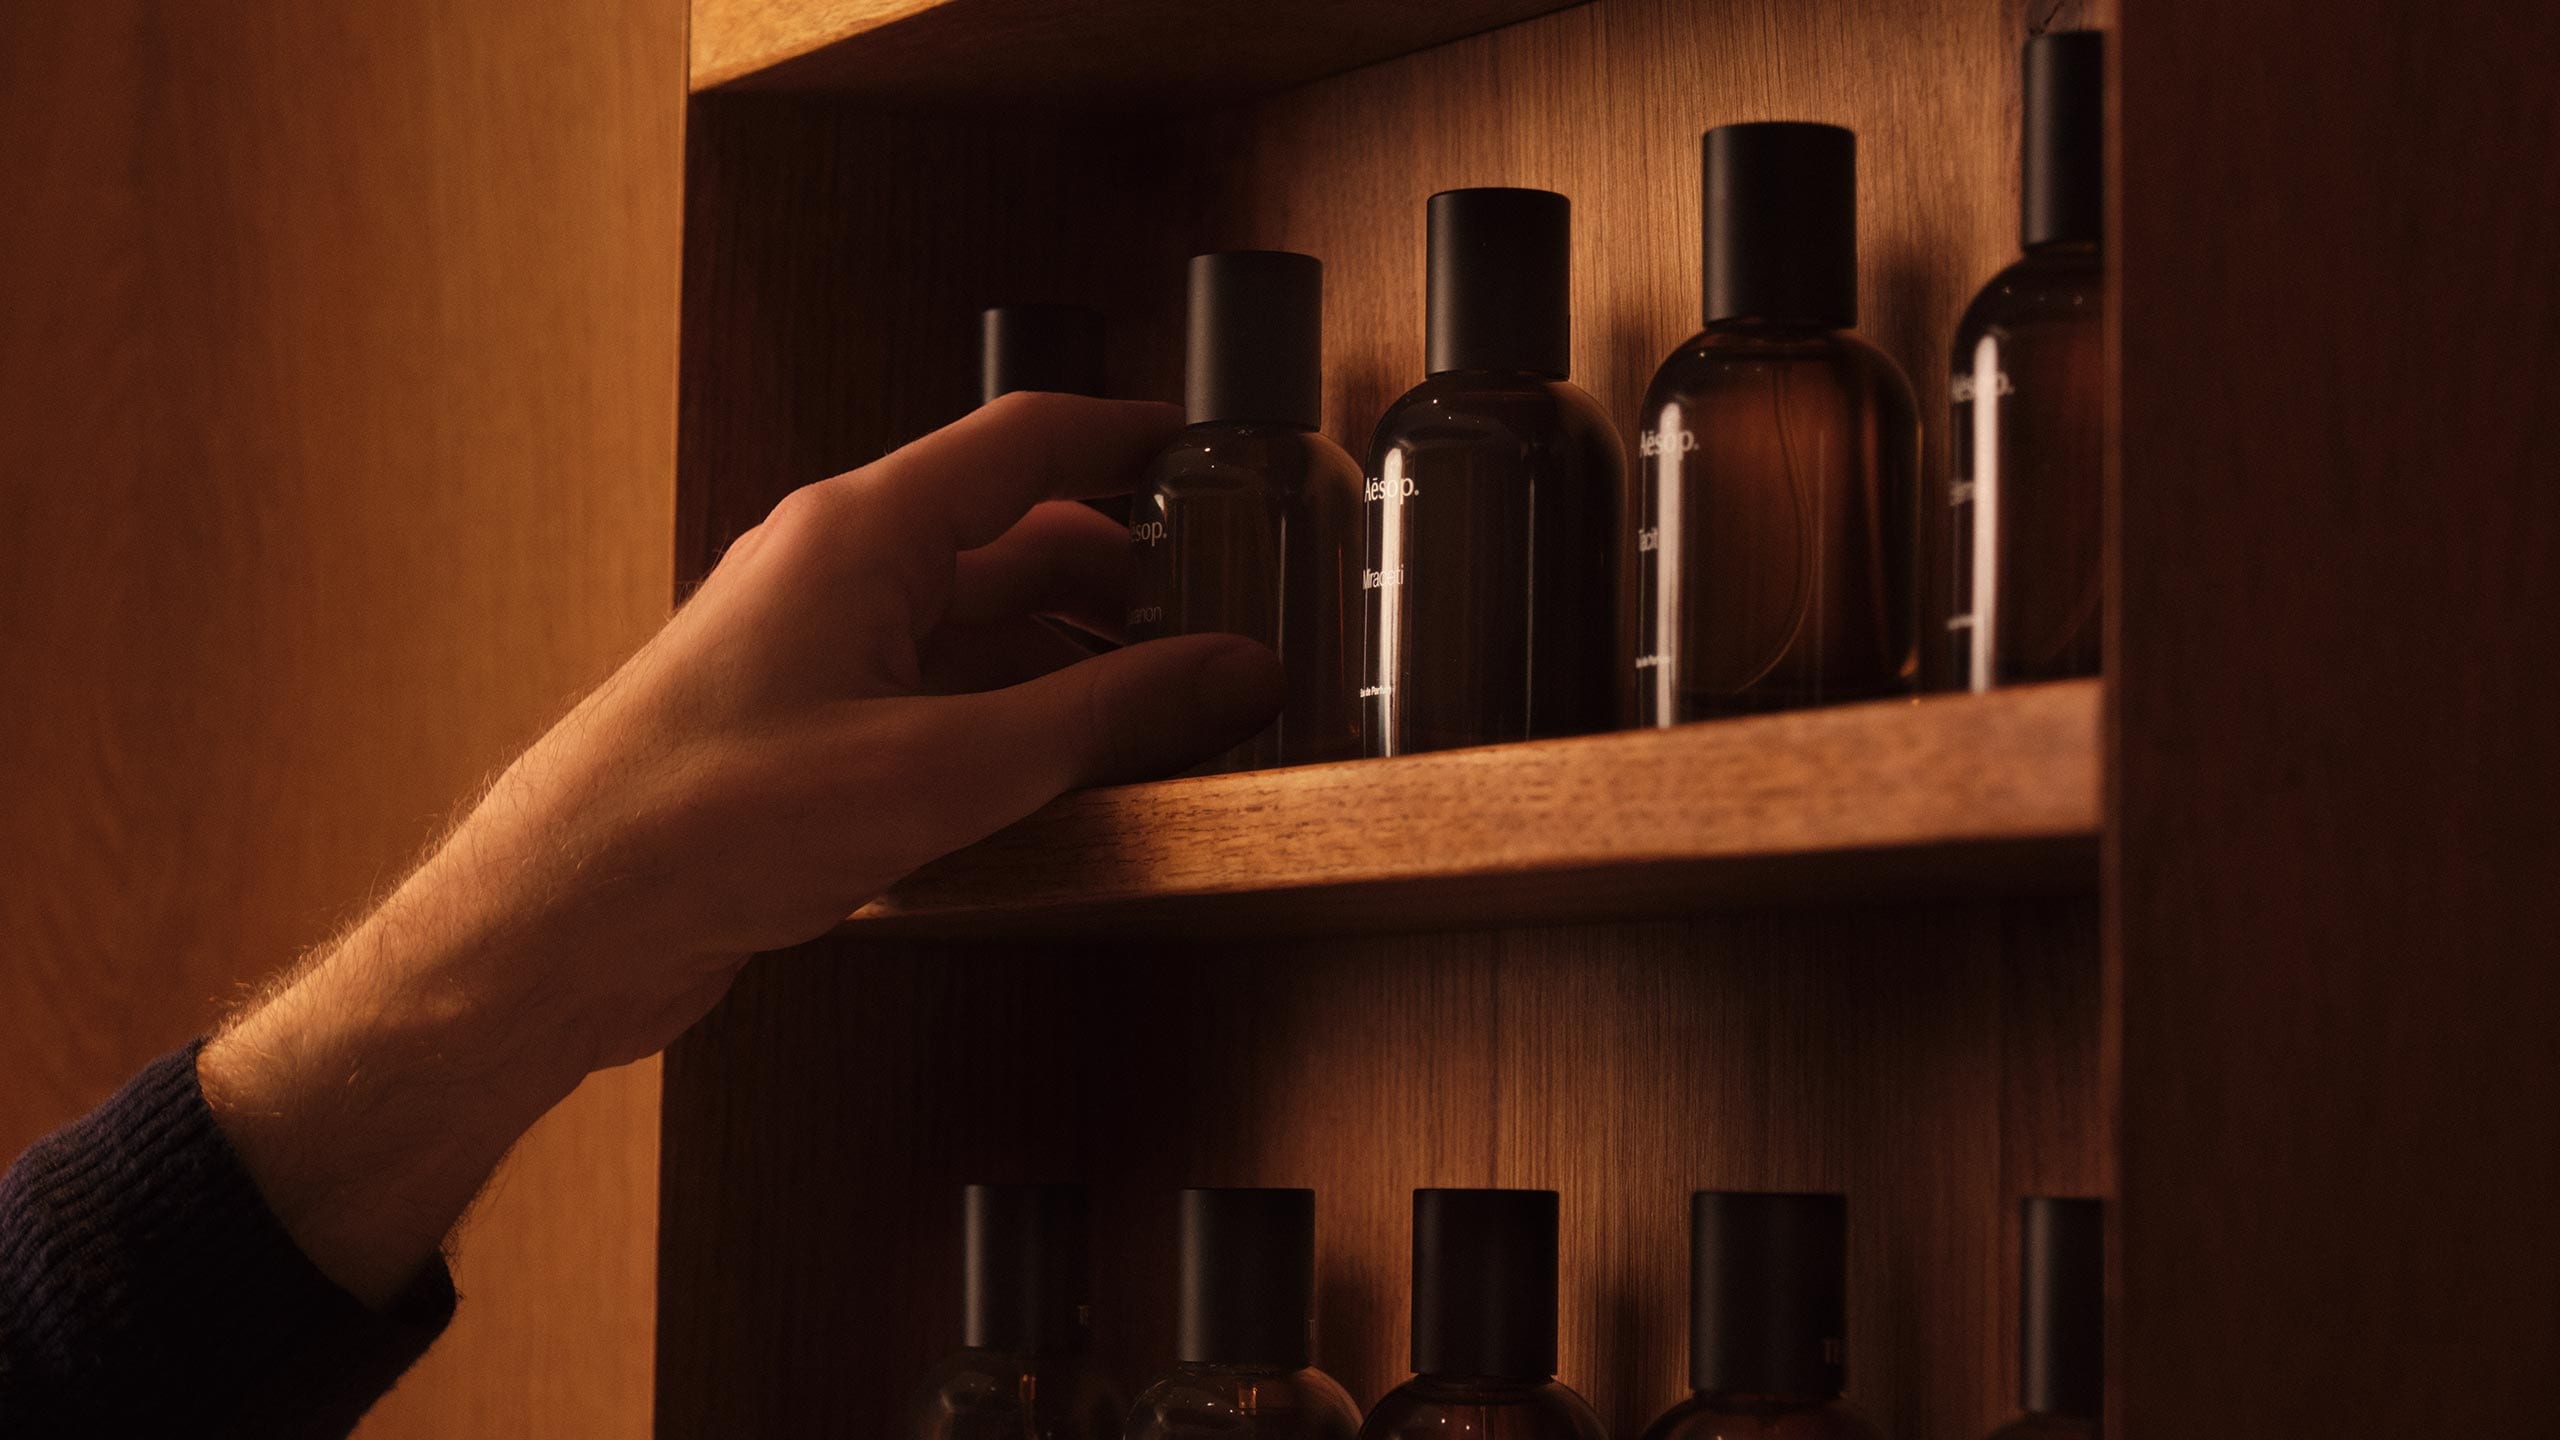 A hand reaching out to grab the Aesop fragrance from the wooden shelves